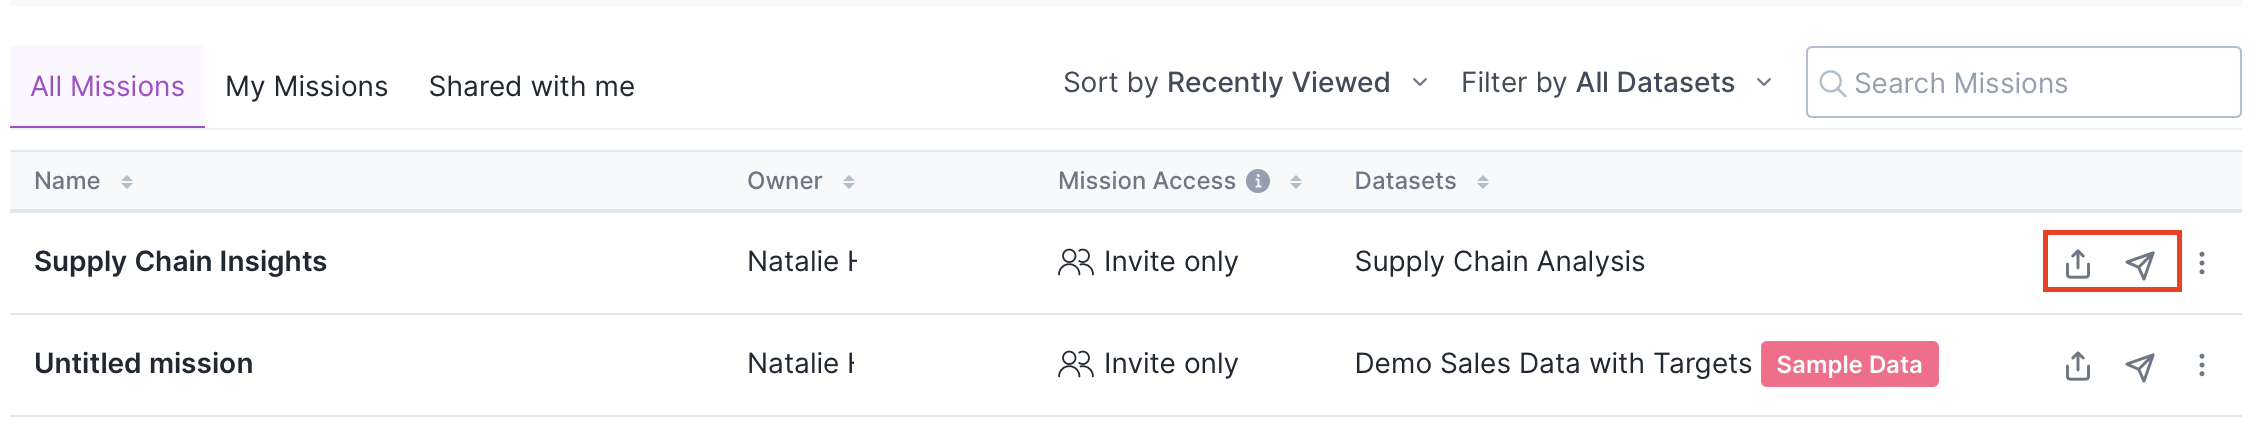 Share buttons on Missions